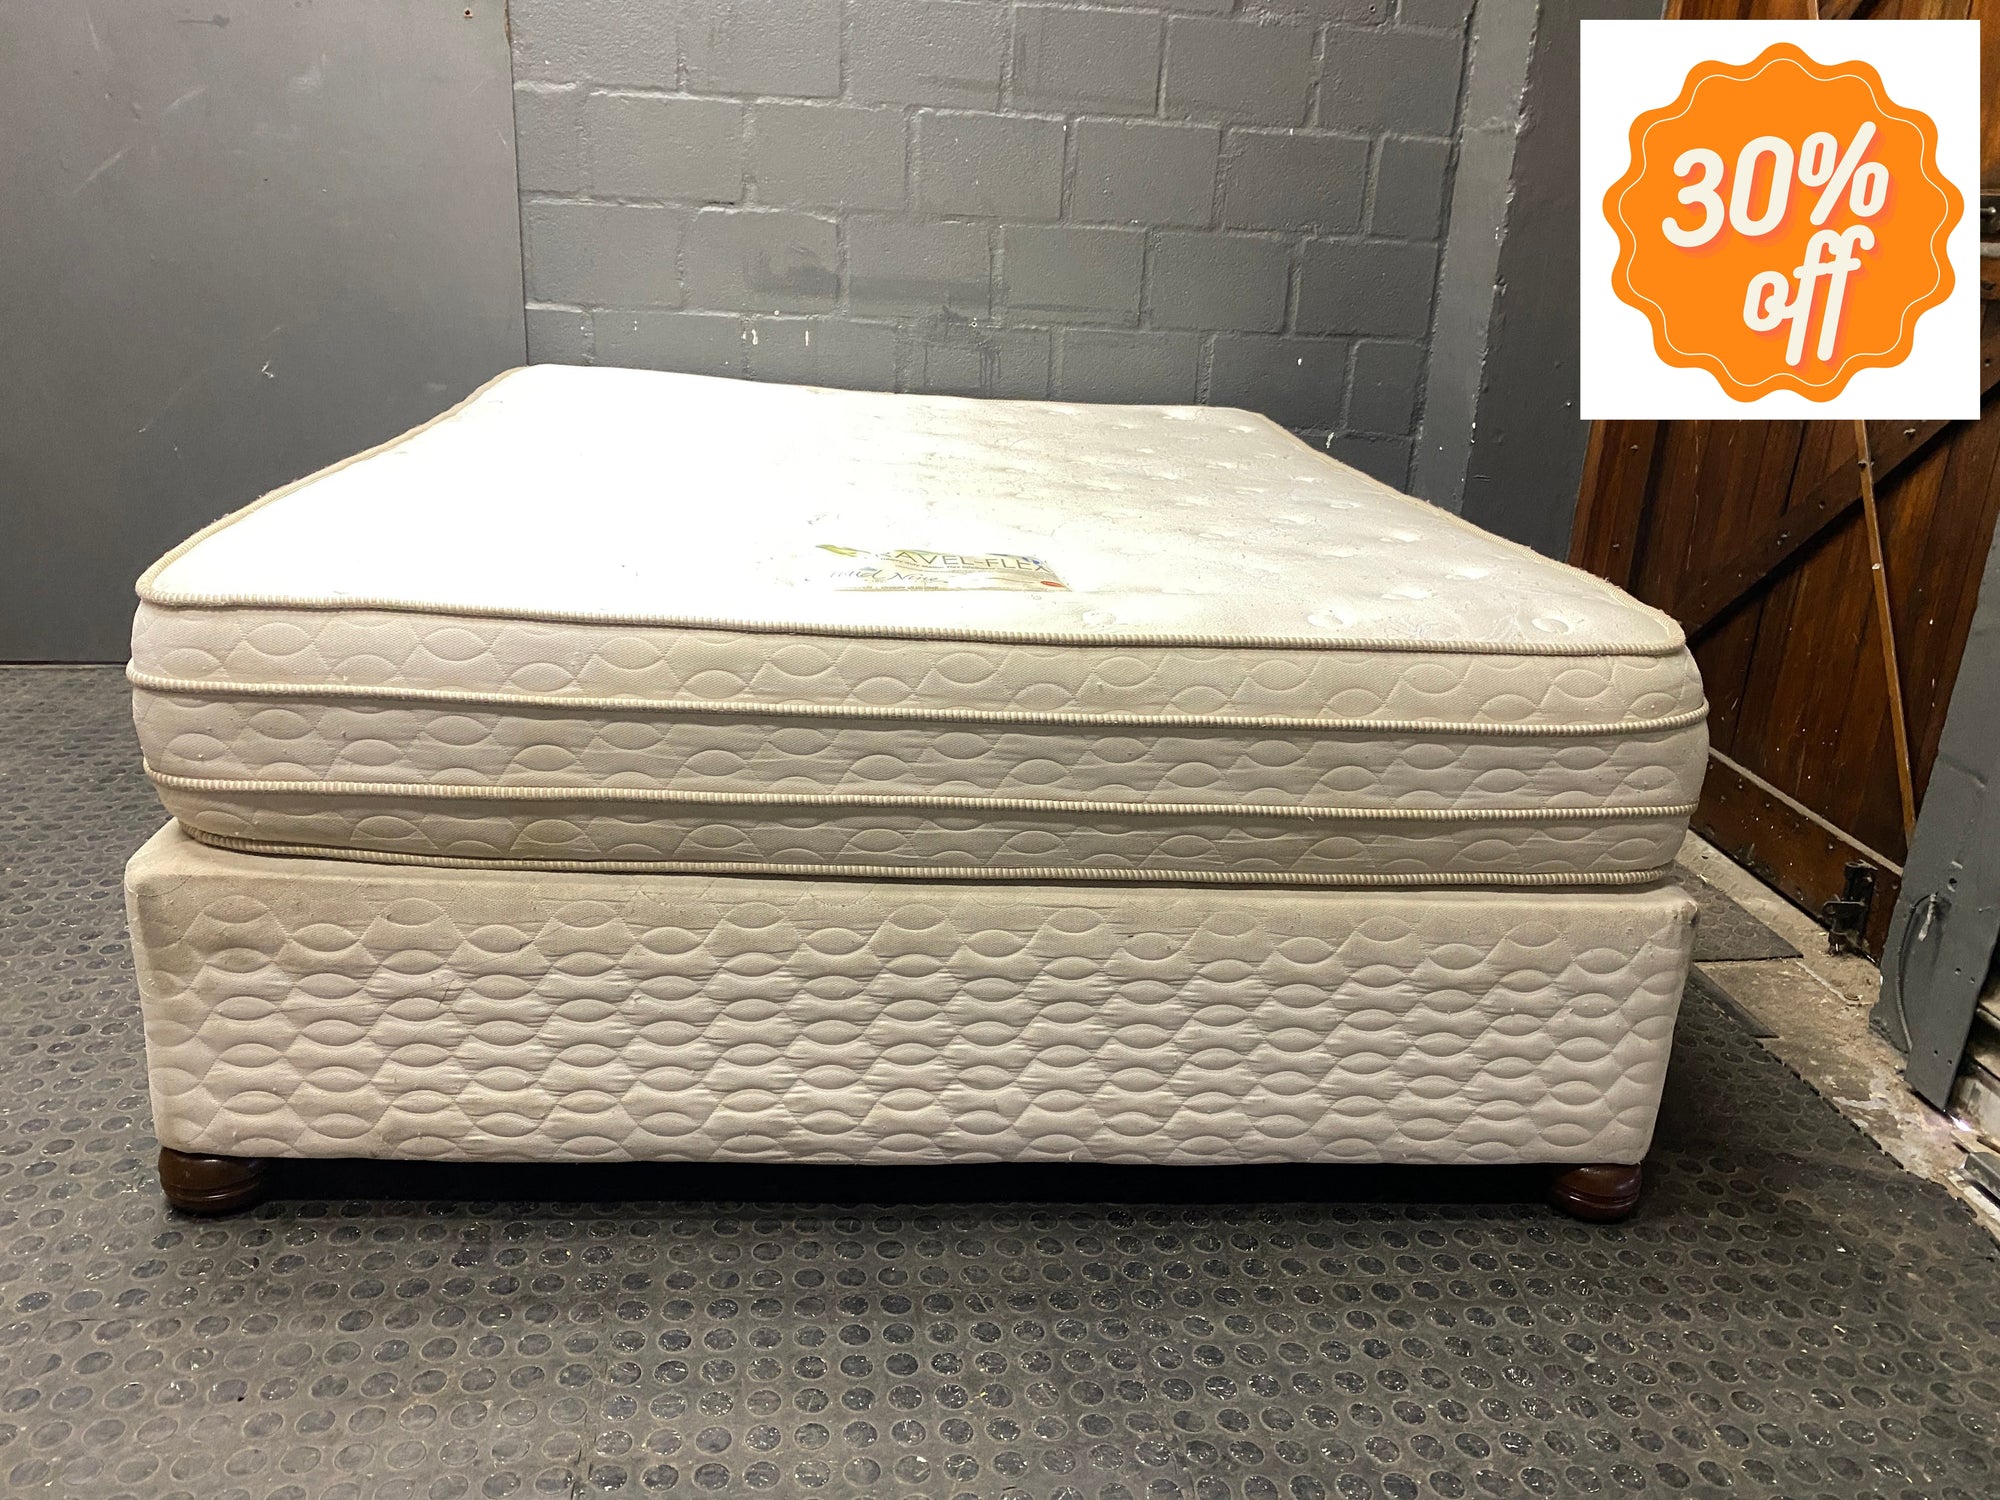 Travel-Flex Queen Size Bed - REDUCED